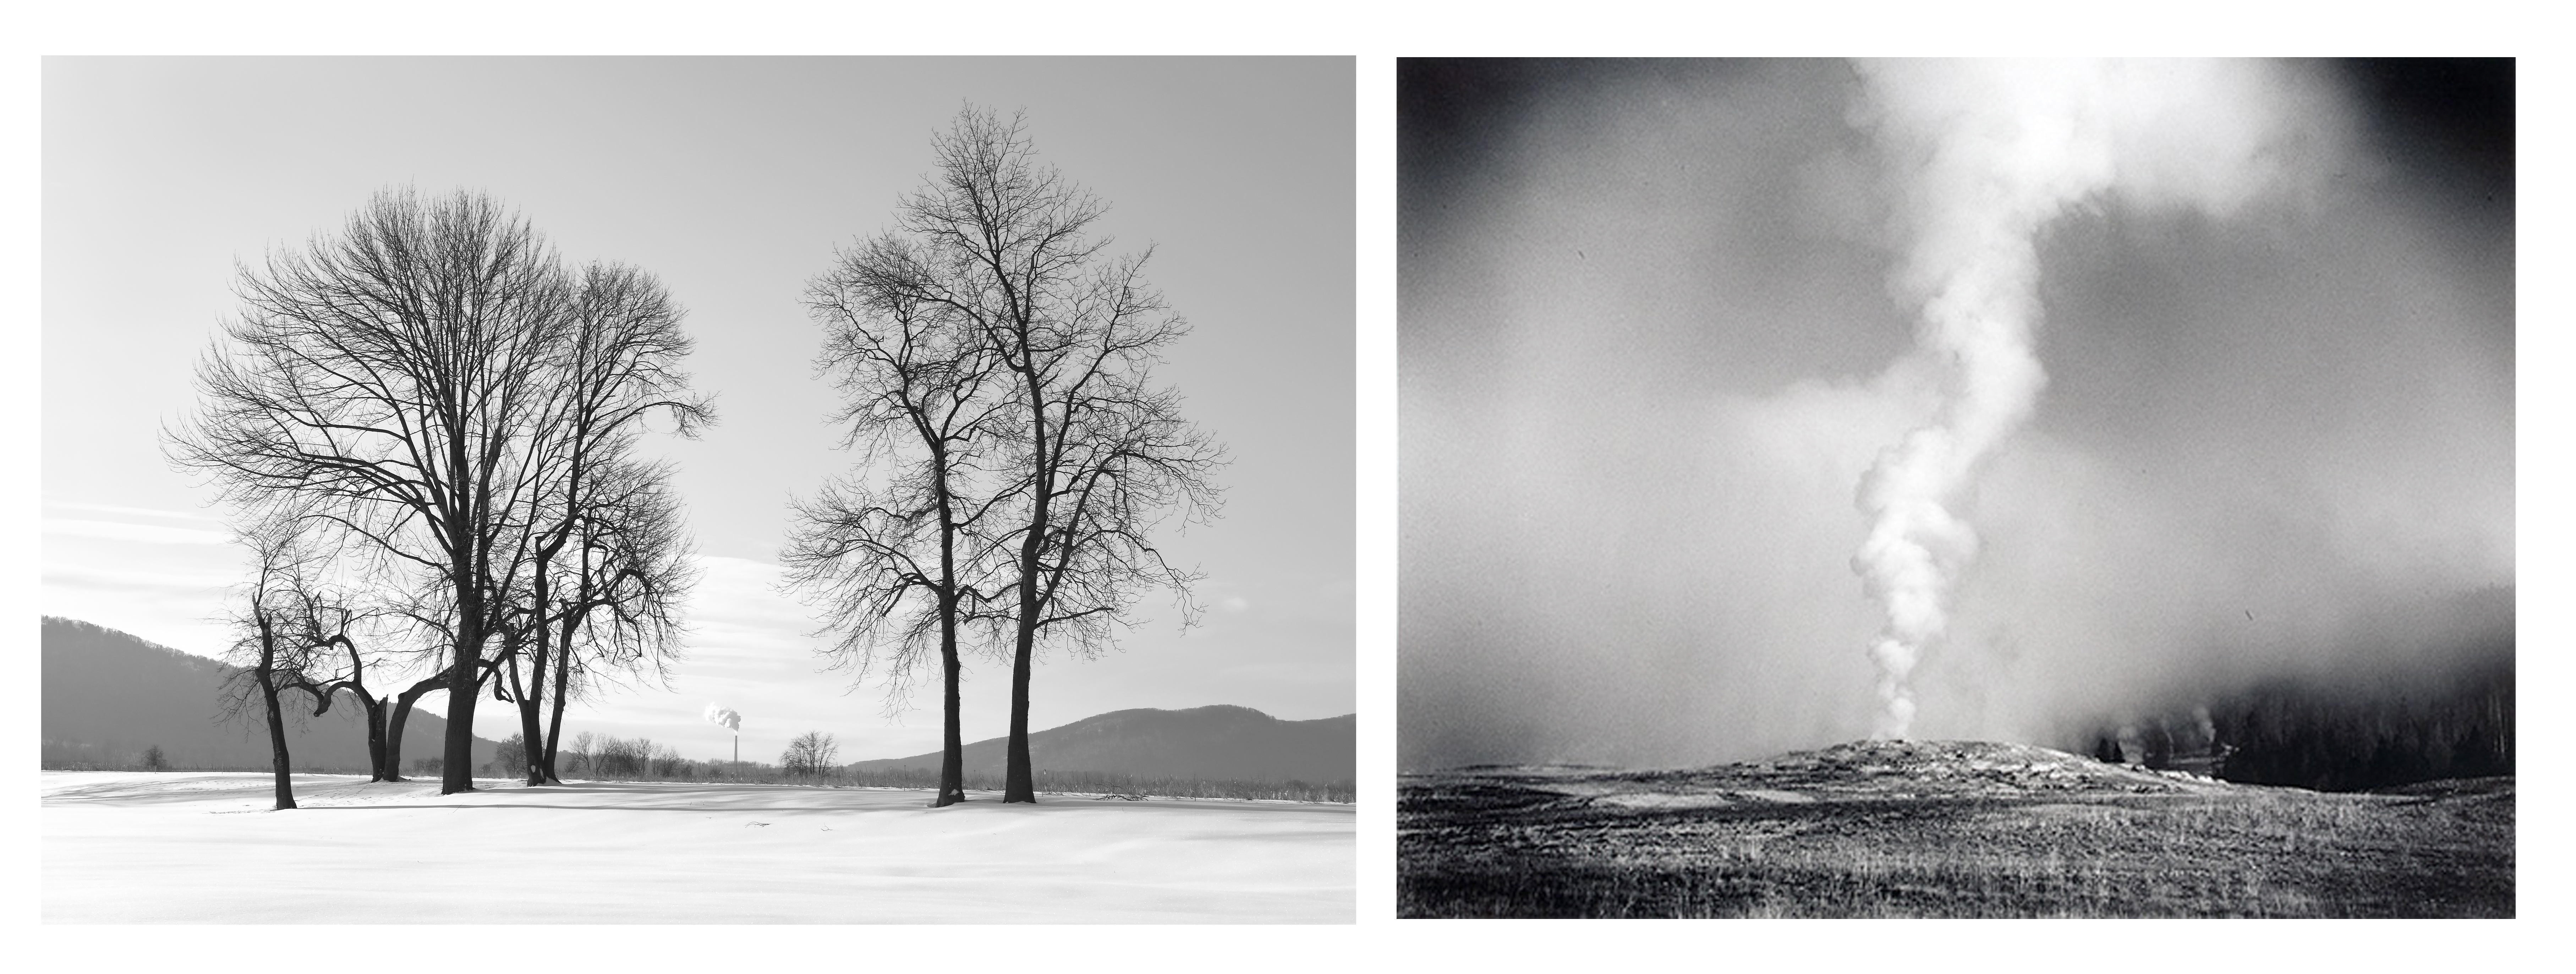 Stephen Petegorsky, "Winter Trees and Smokestack," ca. 2009, Pigment inkjet print, 17 x 22 in., Gift of the artist Marion Belanger, "Old Faithful," Photograph, Gift of the artist